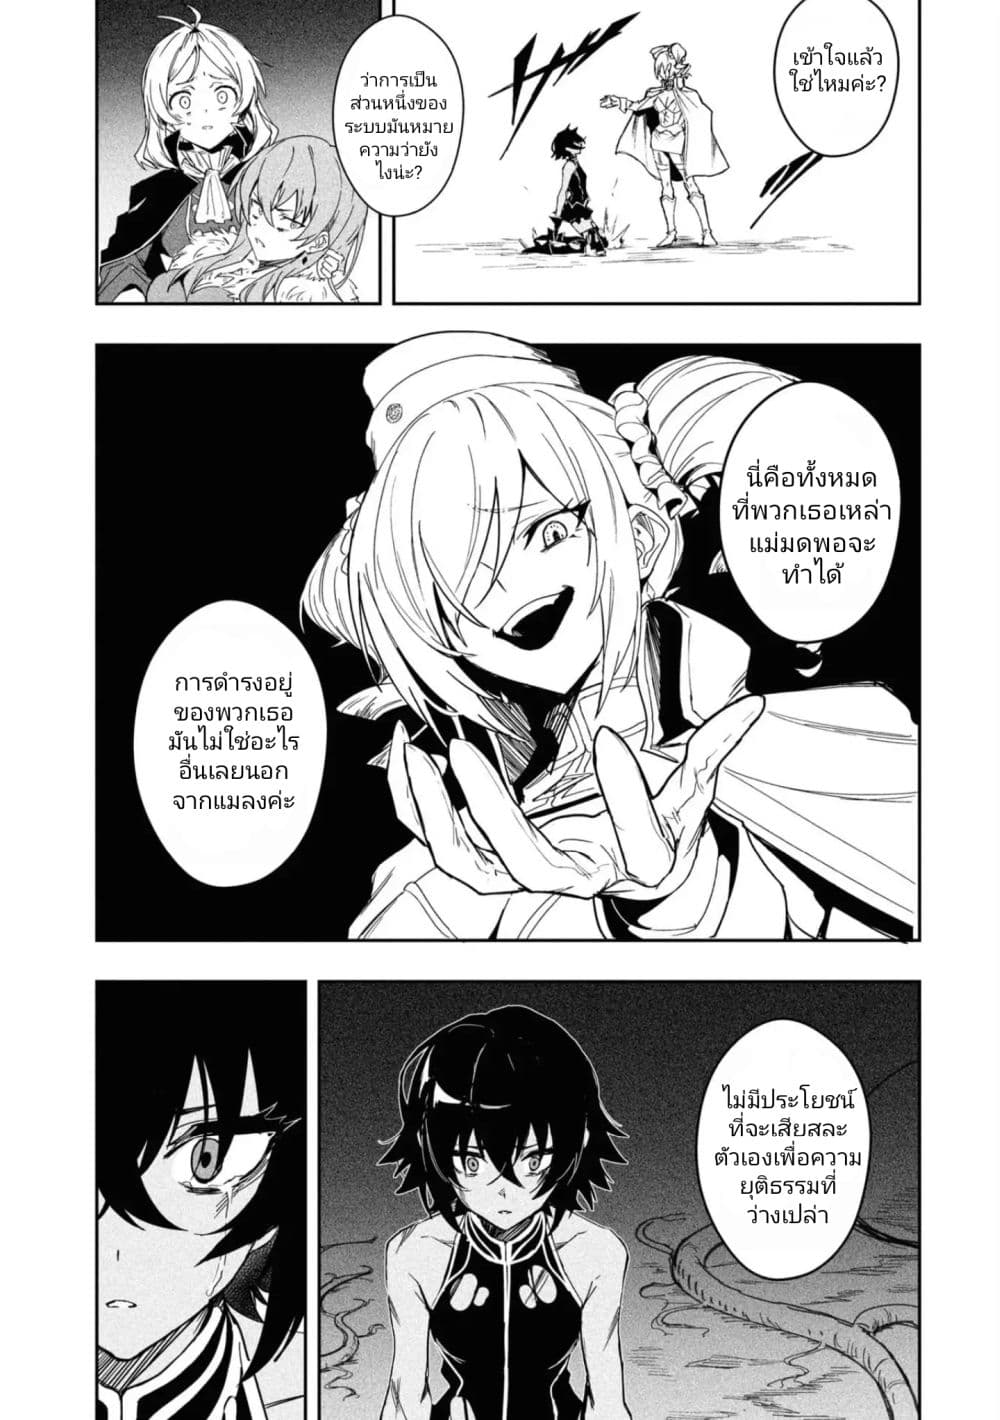 Witch Guild Fantasia 12 (11)